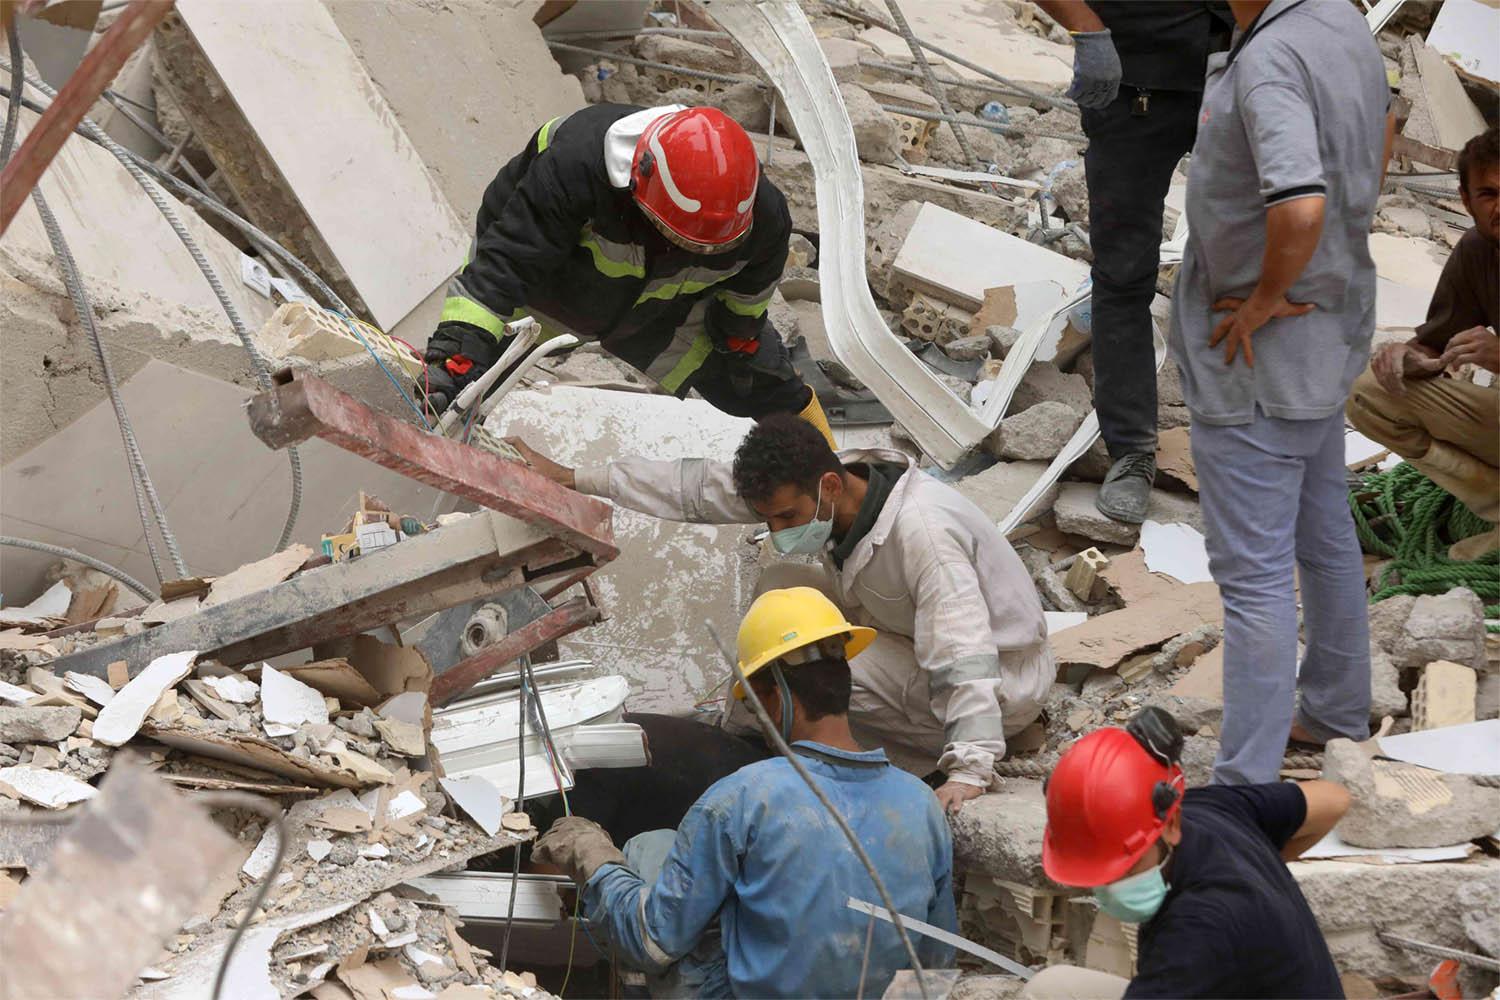 Two more bodies were pulled from the rubble 